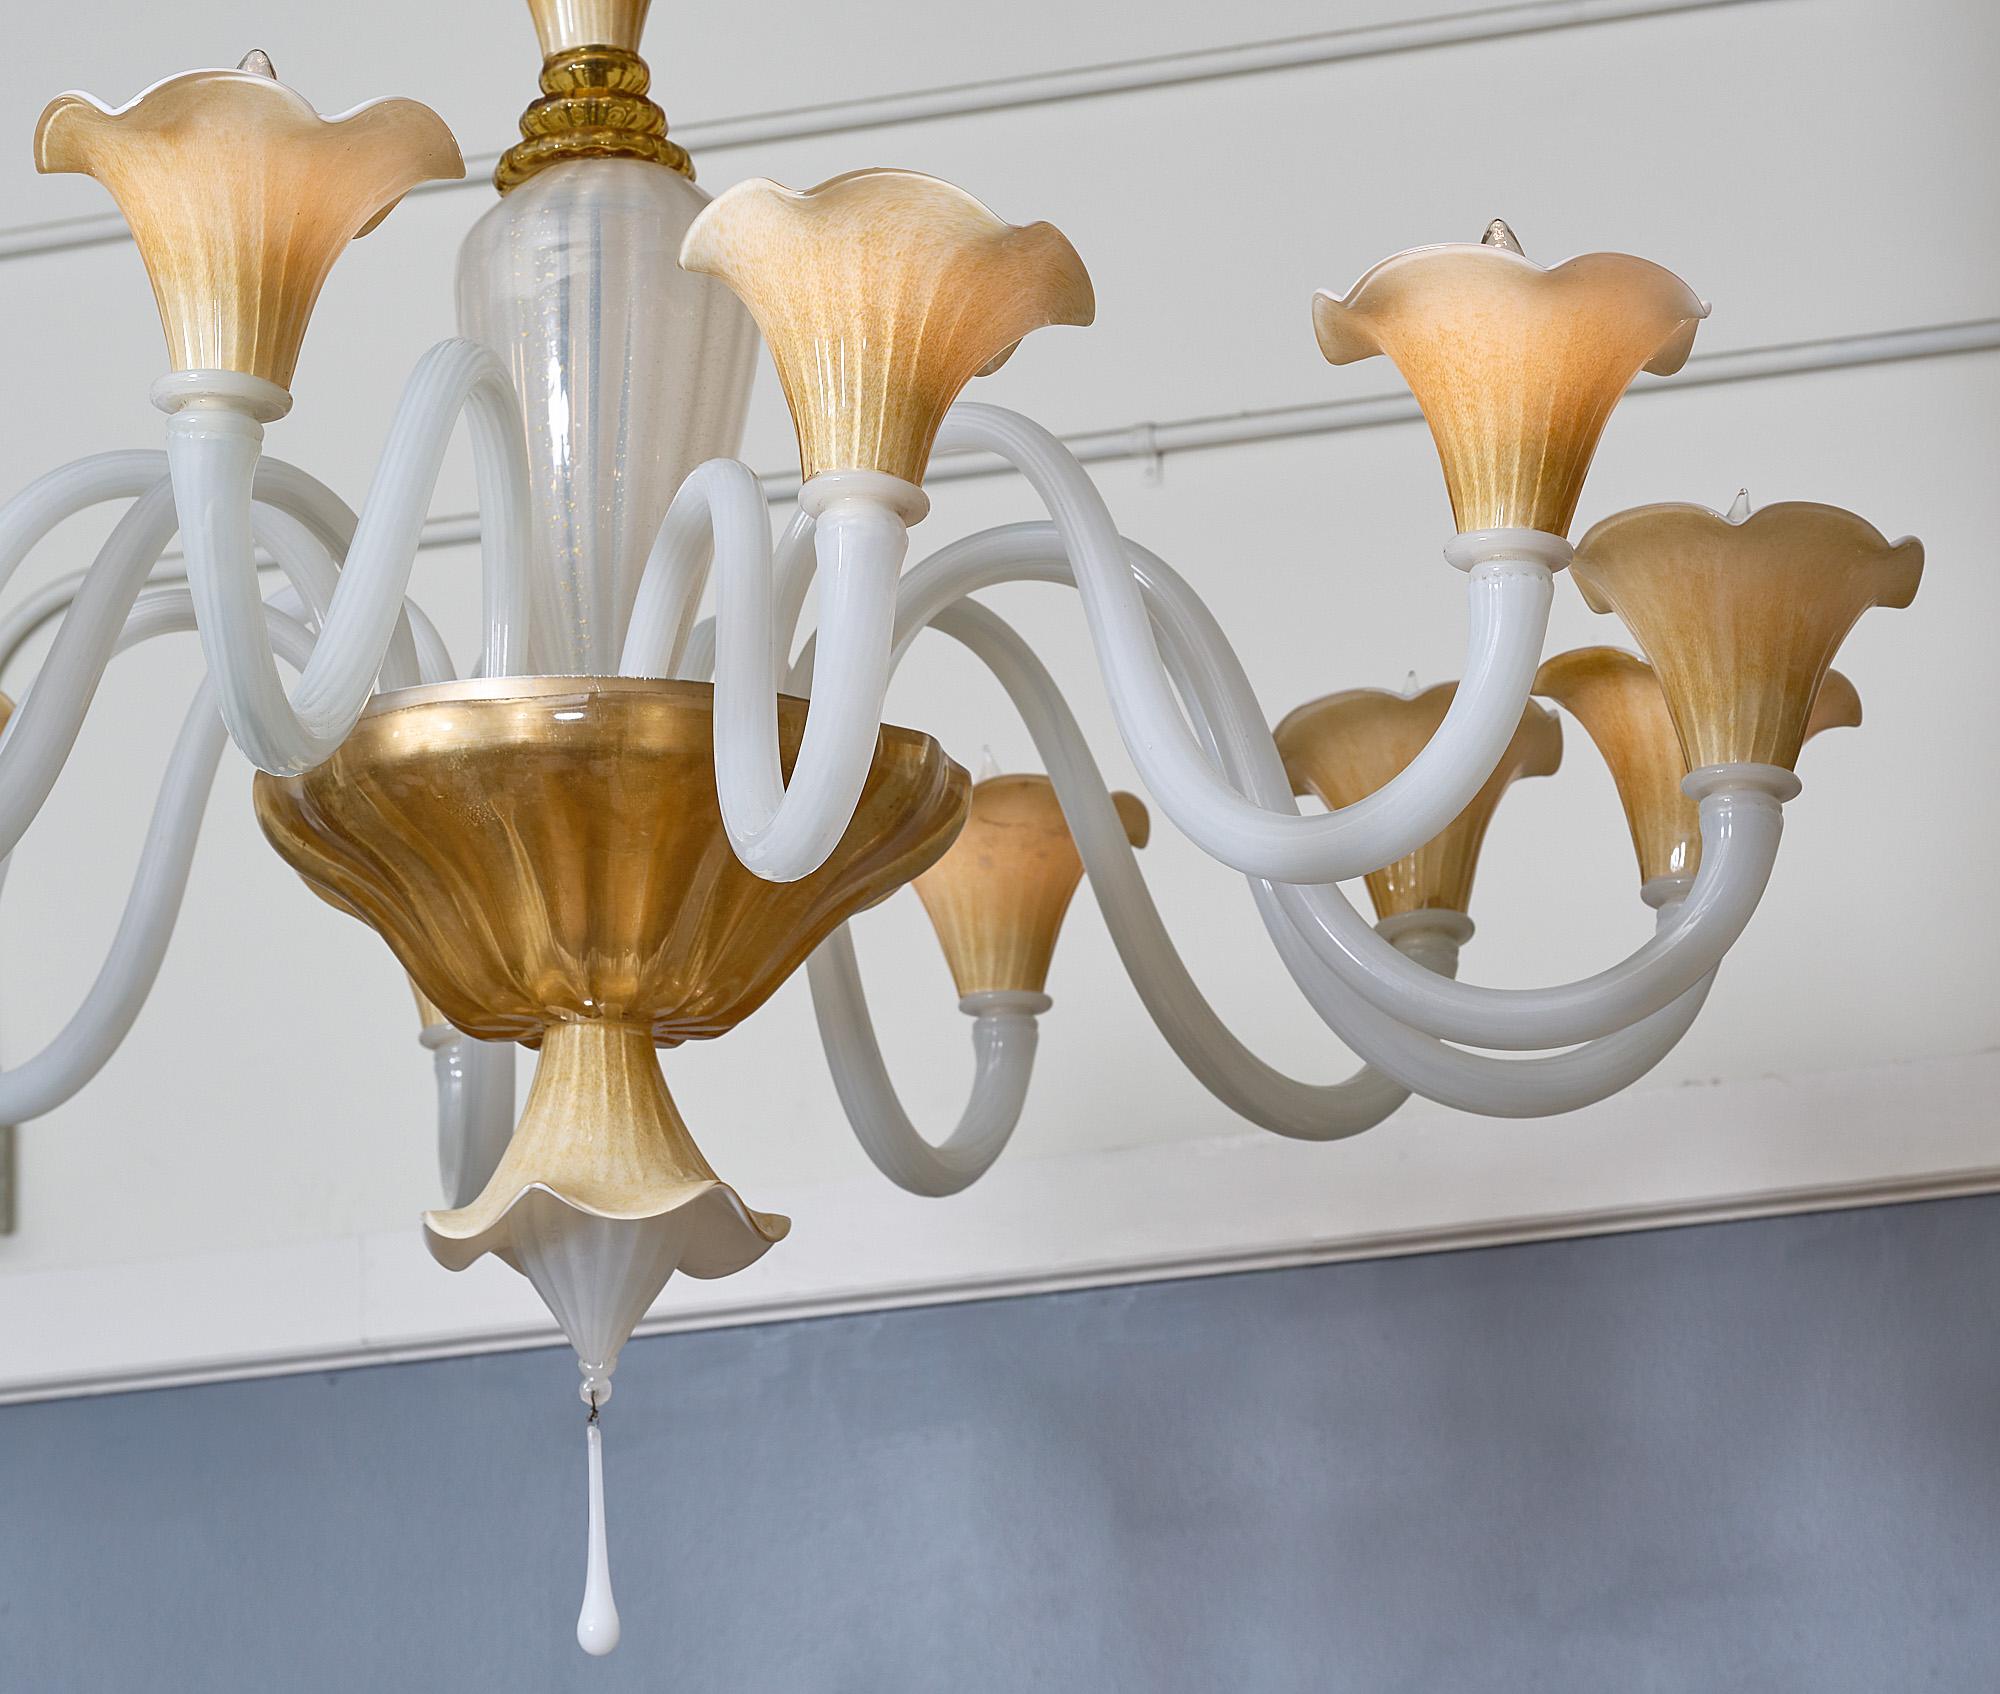 Spectacular vintage Italian Venini Murano glass chandelier made of hand blown opaline and cream glass with 23 carat 